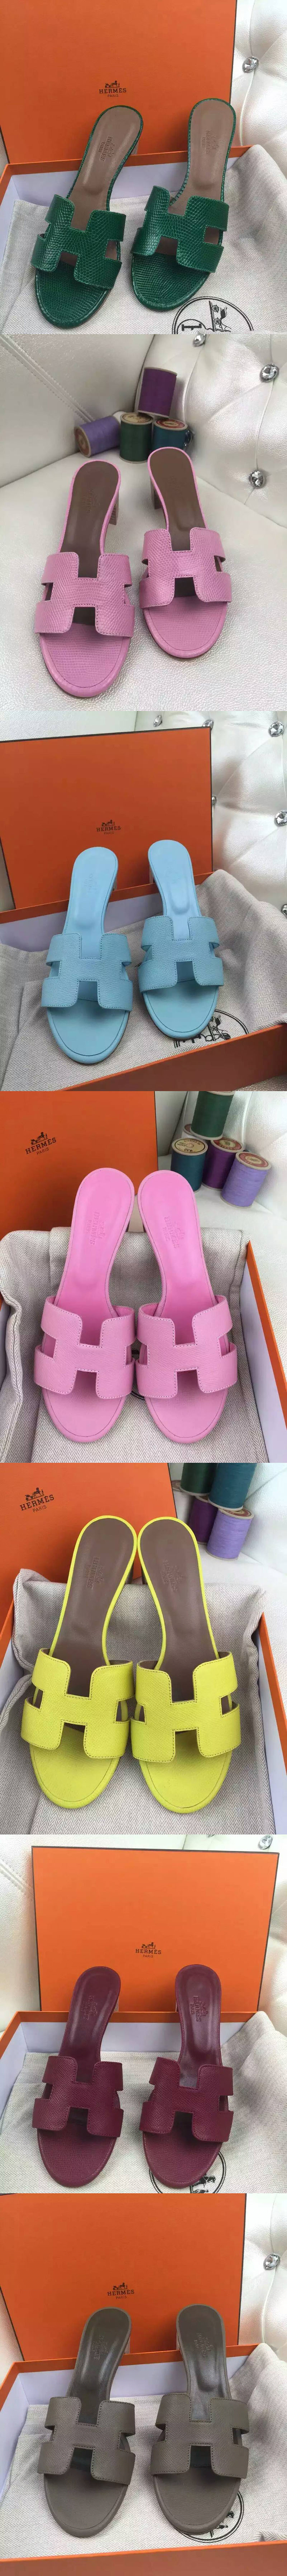 Replica Hermes Original Leather Sandals And Slippers